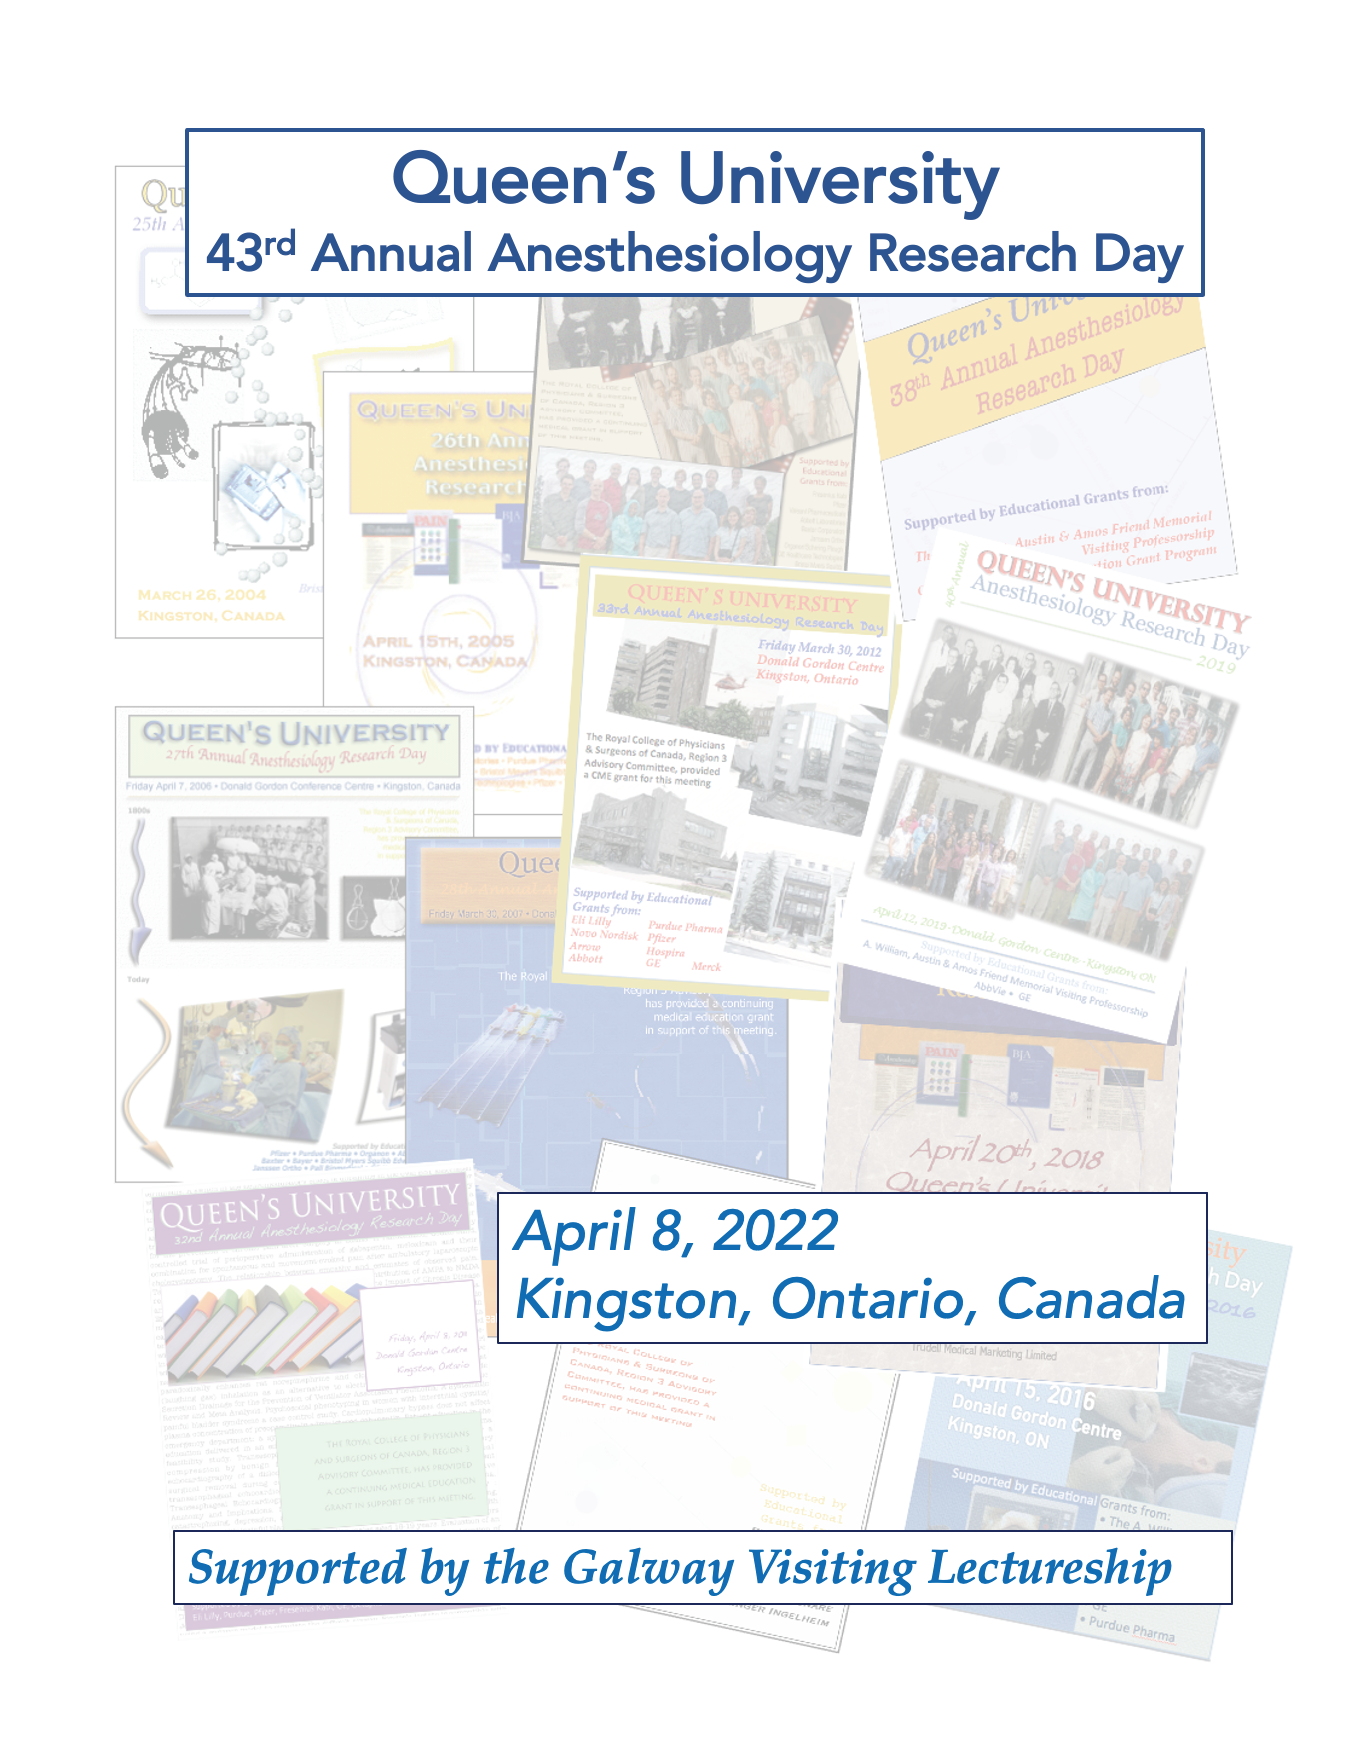 Queen's University 43rd Annual Anesthesiology Research Day